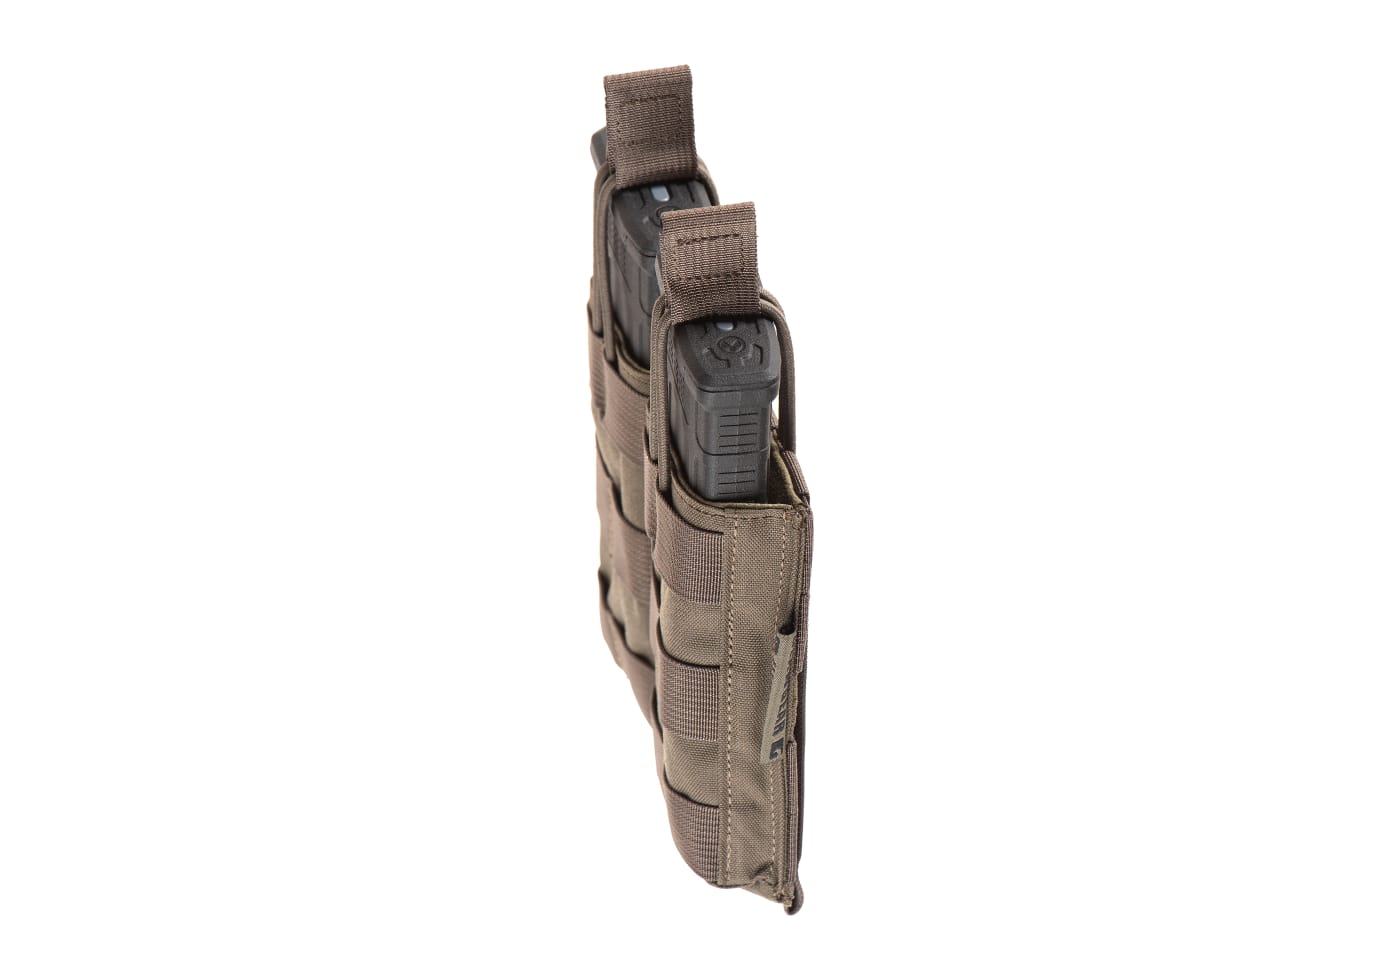 Clawgear 5.56mm Open Double Mag Pouch Core